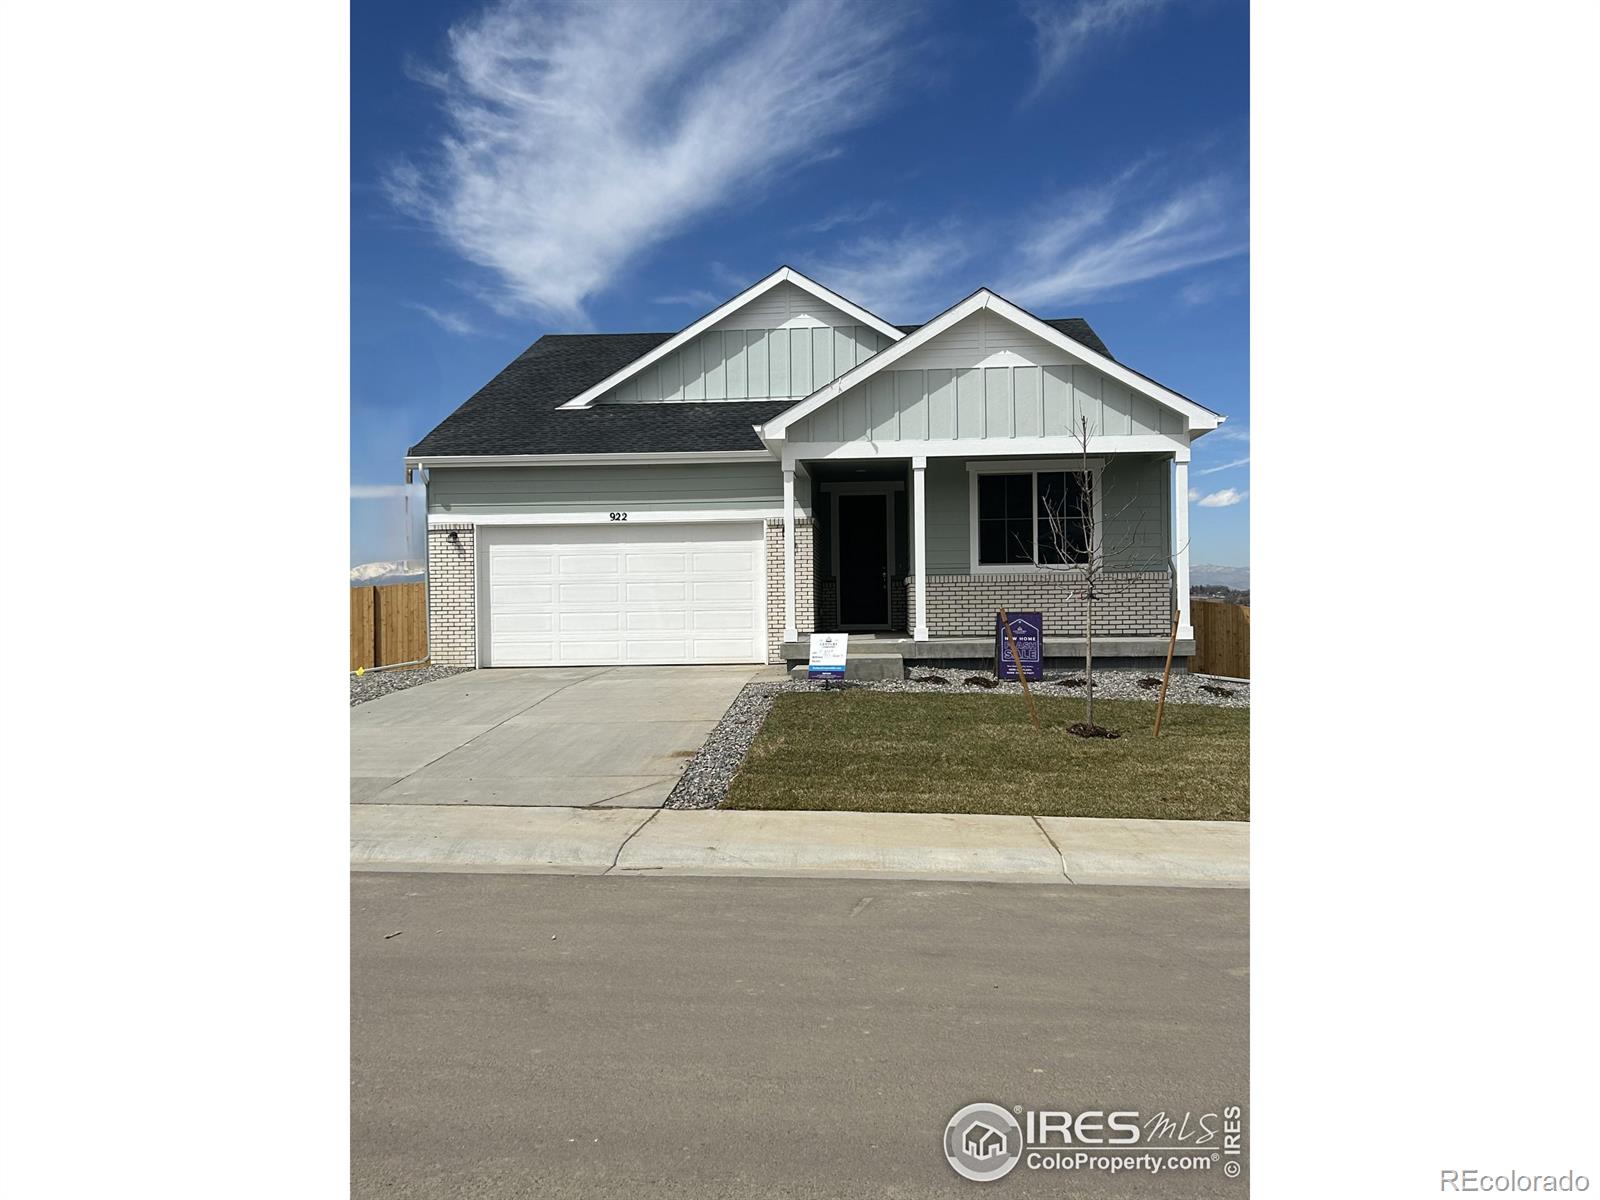 Report Image for 922  Huron Street,Johnstown, Colorado